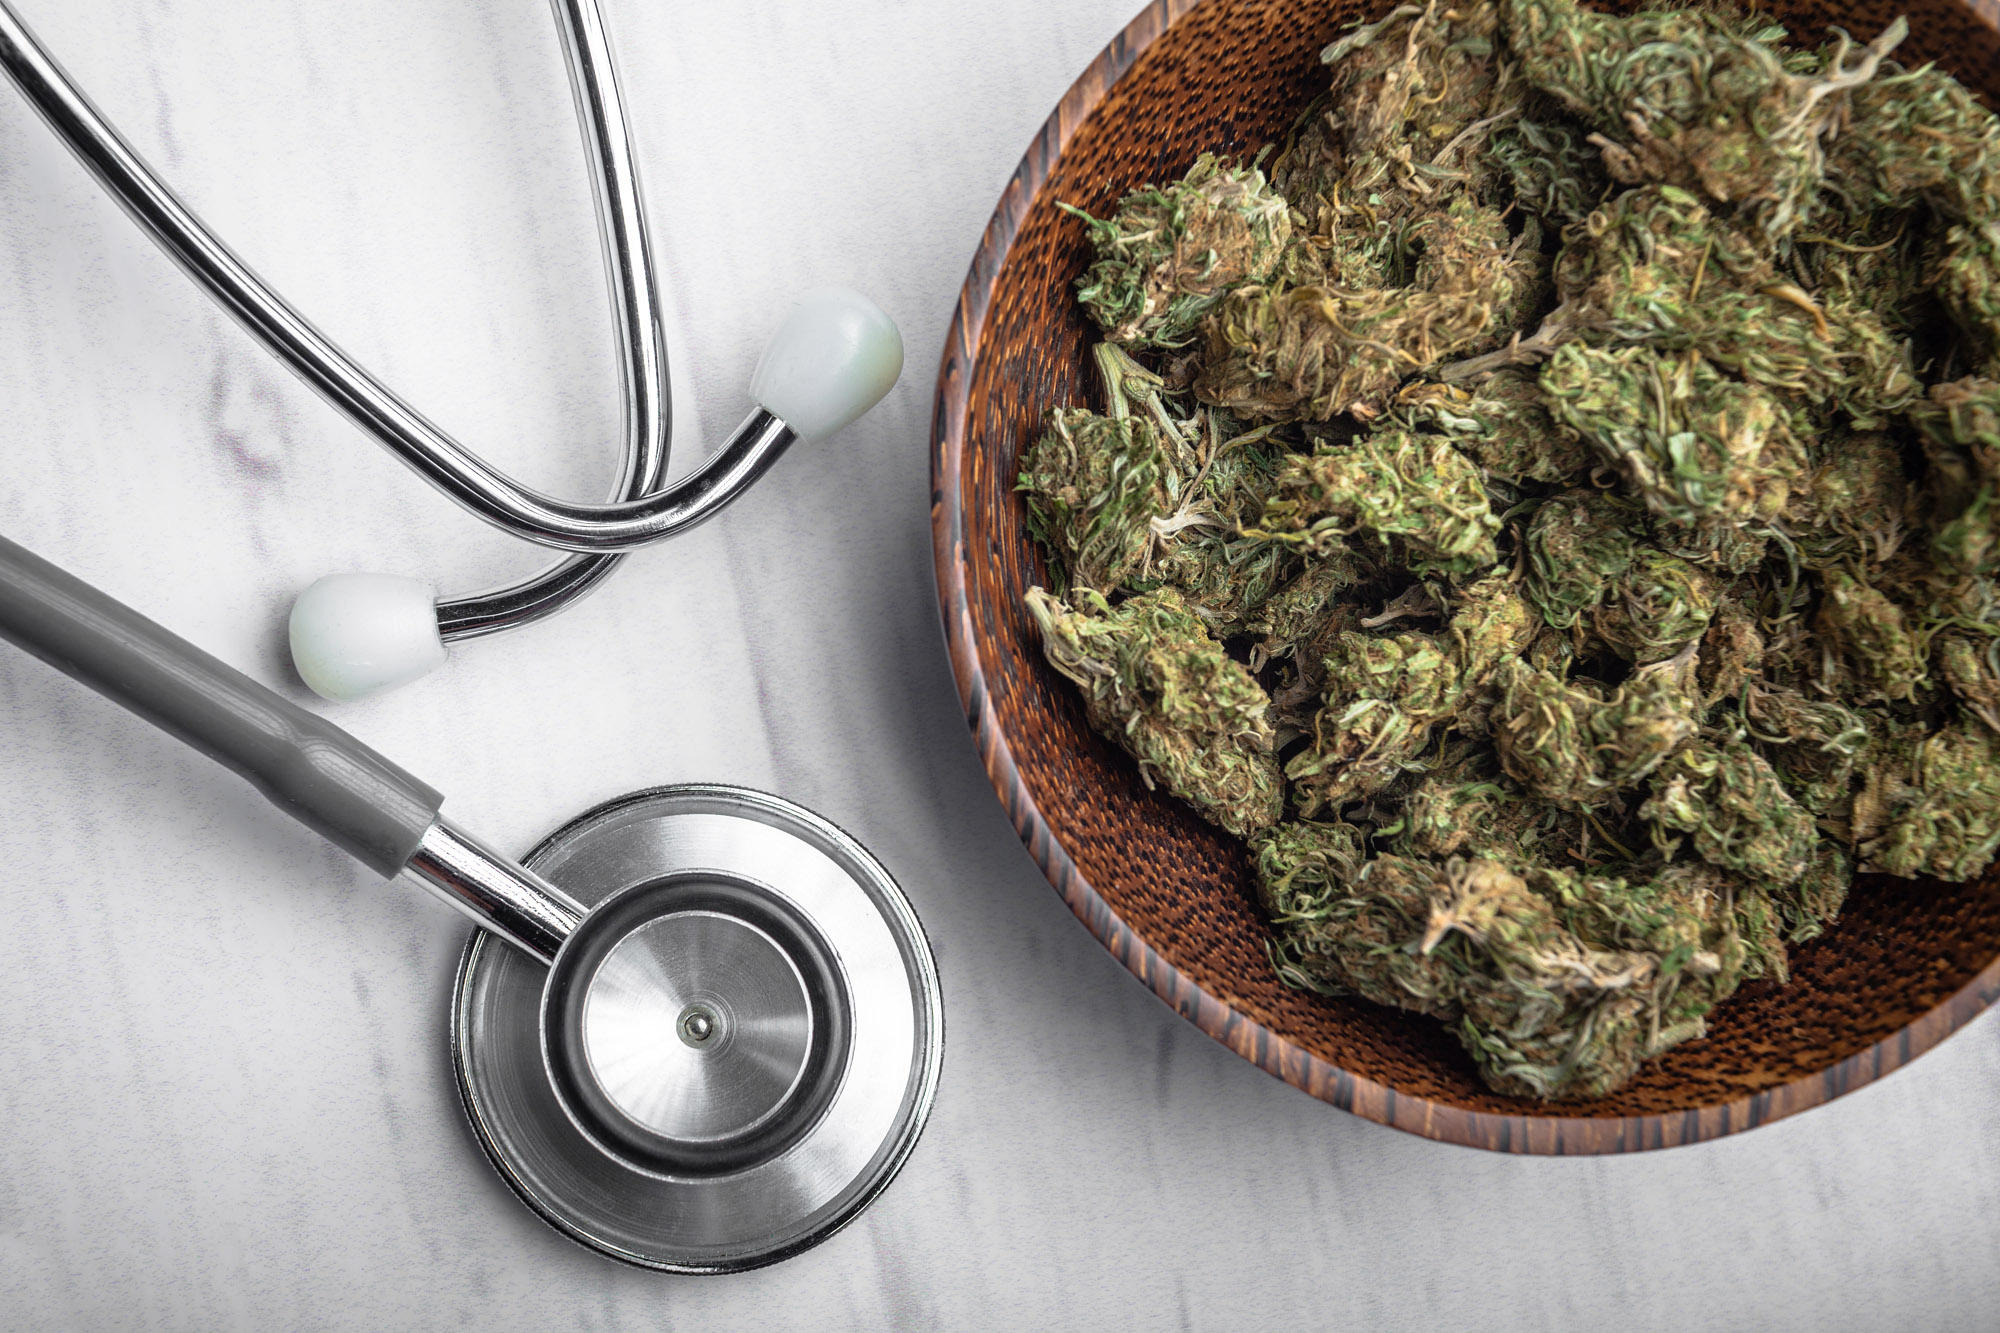 Can I Use Medical Cannabis in Miami?